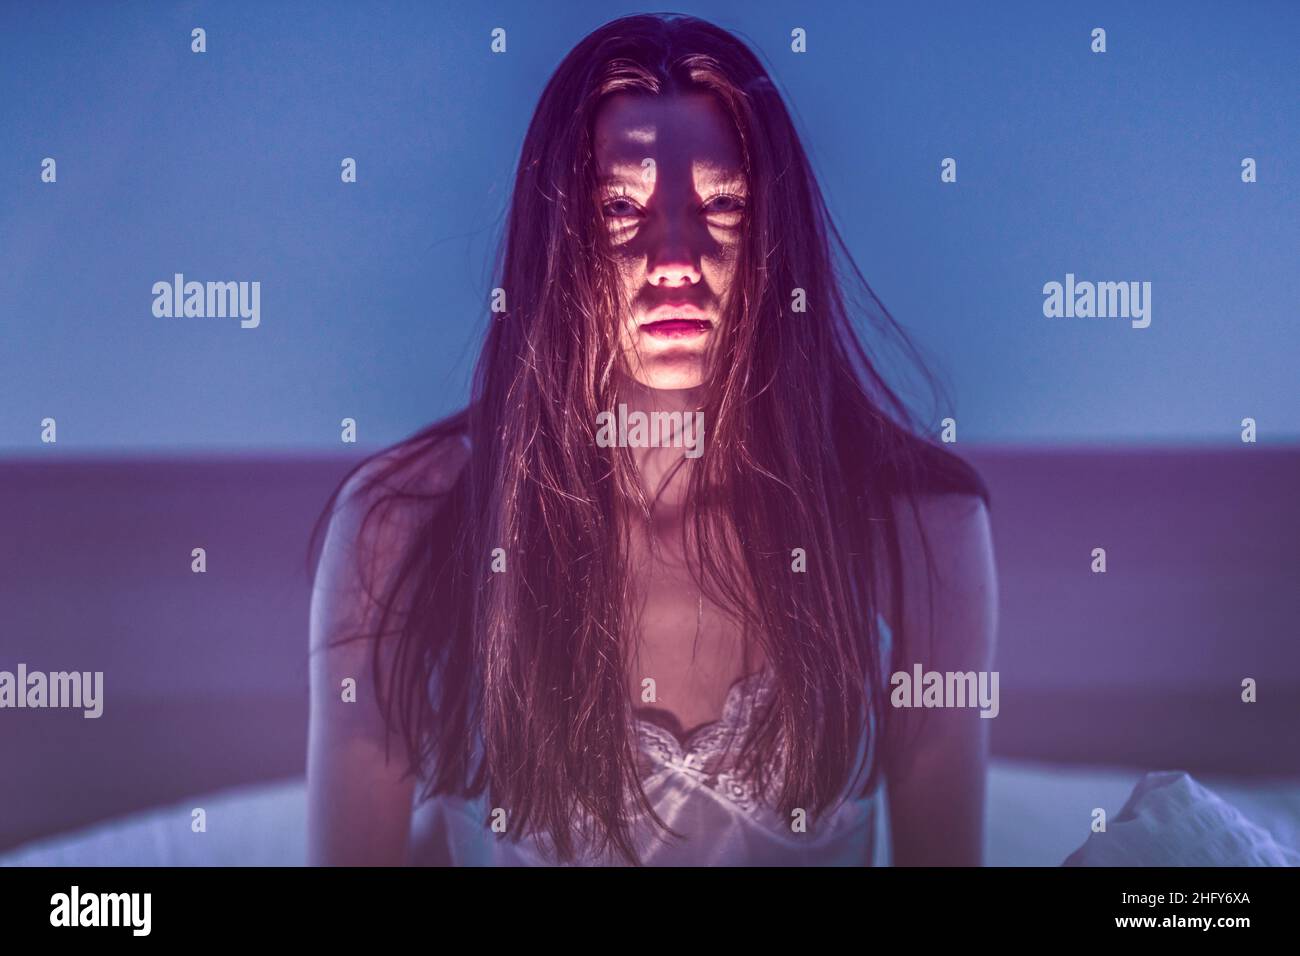 Scare. Horror. Scary girl with dark hair. The woman shines a flashlight at herself from below and creates a scary face. Stock Photo